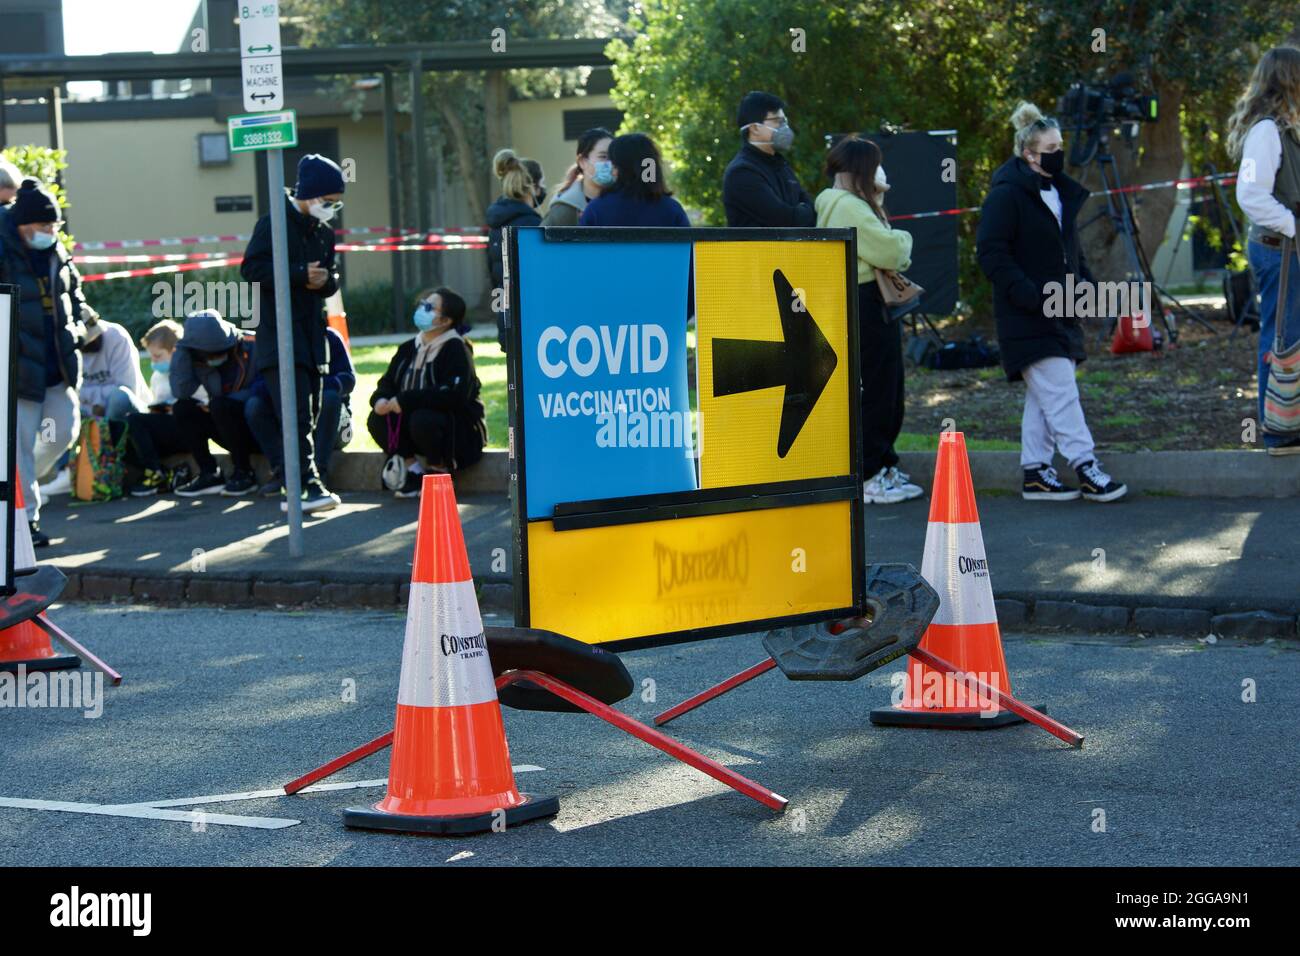 MELBOURNE, AUSTRALIA - Aug 28, 2021: Covid sign and arrow with people lining up to get coronavirus vaccine at new walk-in covid-19 vaccination clinic Stock Photo